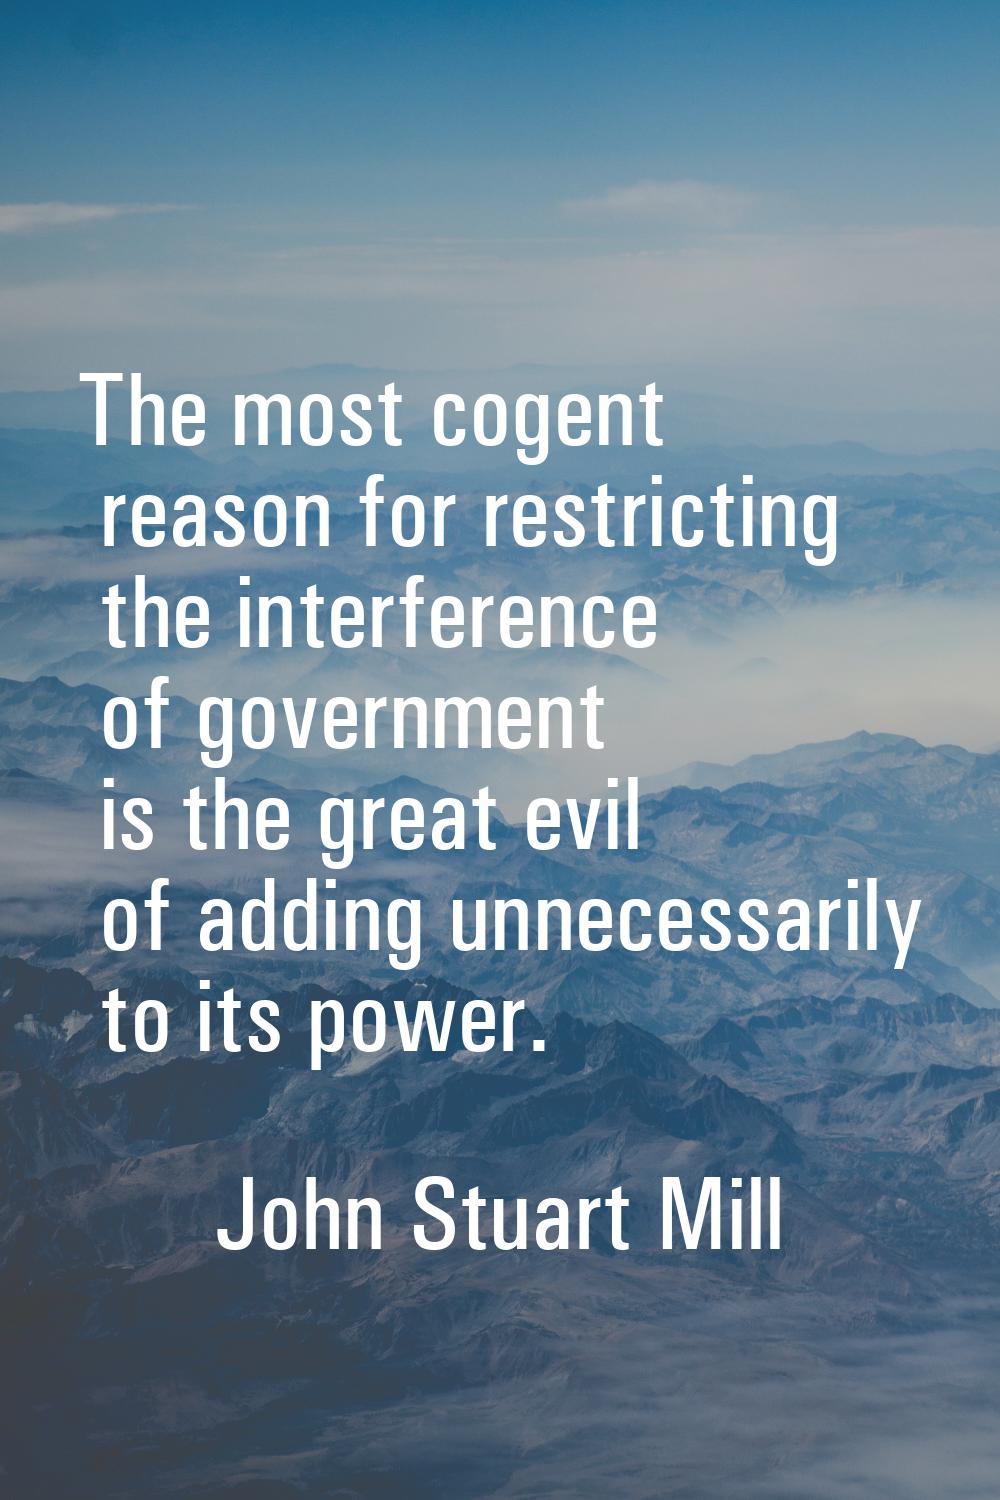 The most cogent reason for restricting the interference of government is the great evil of adding u